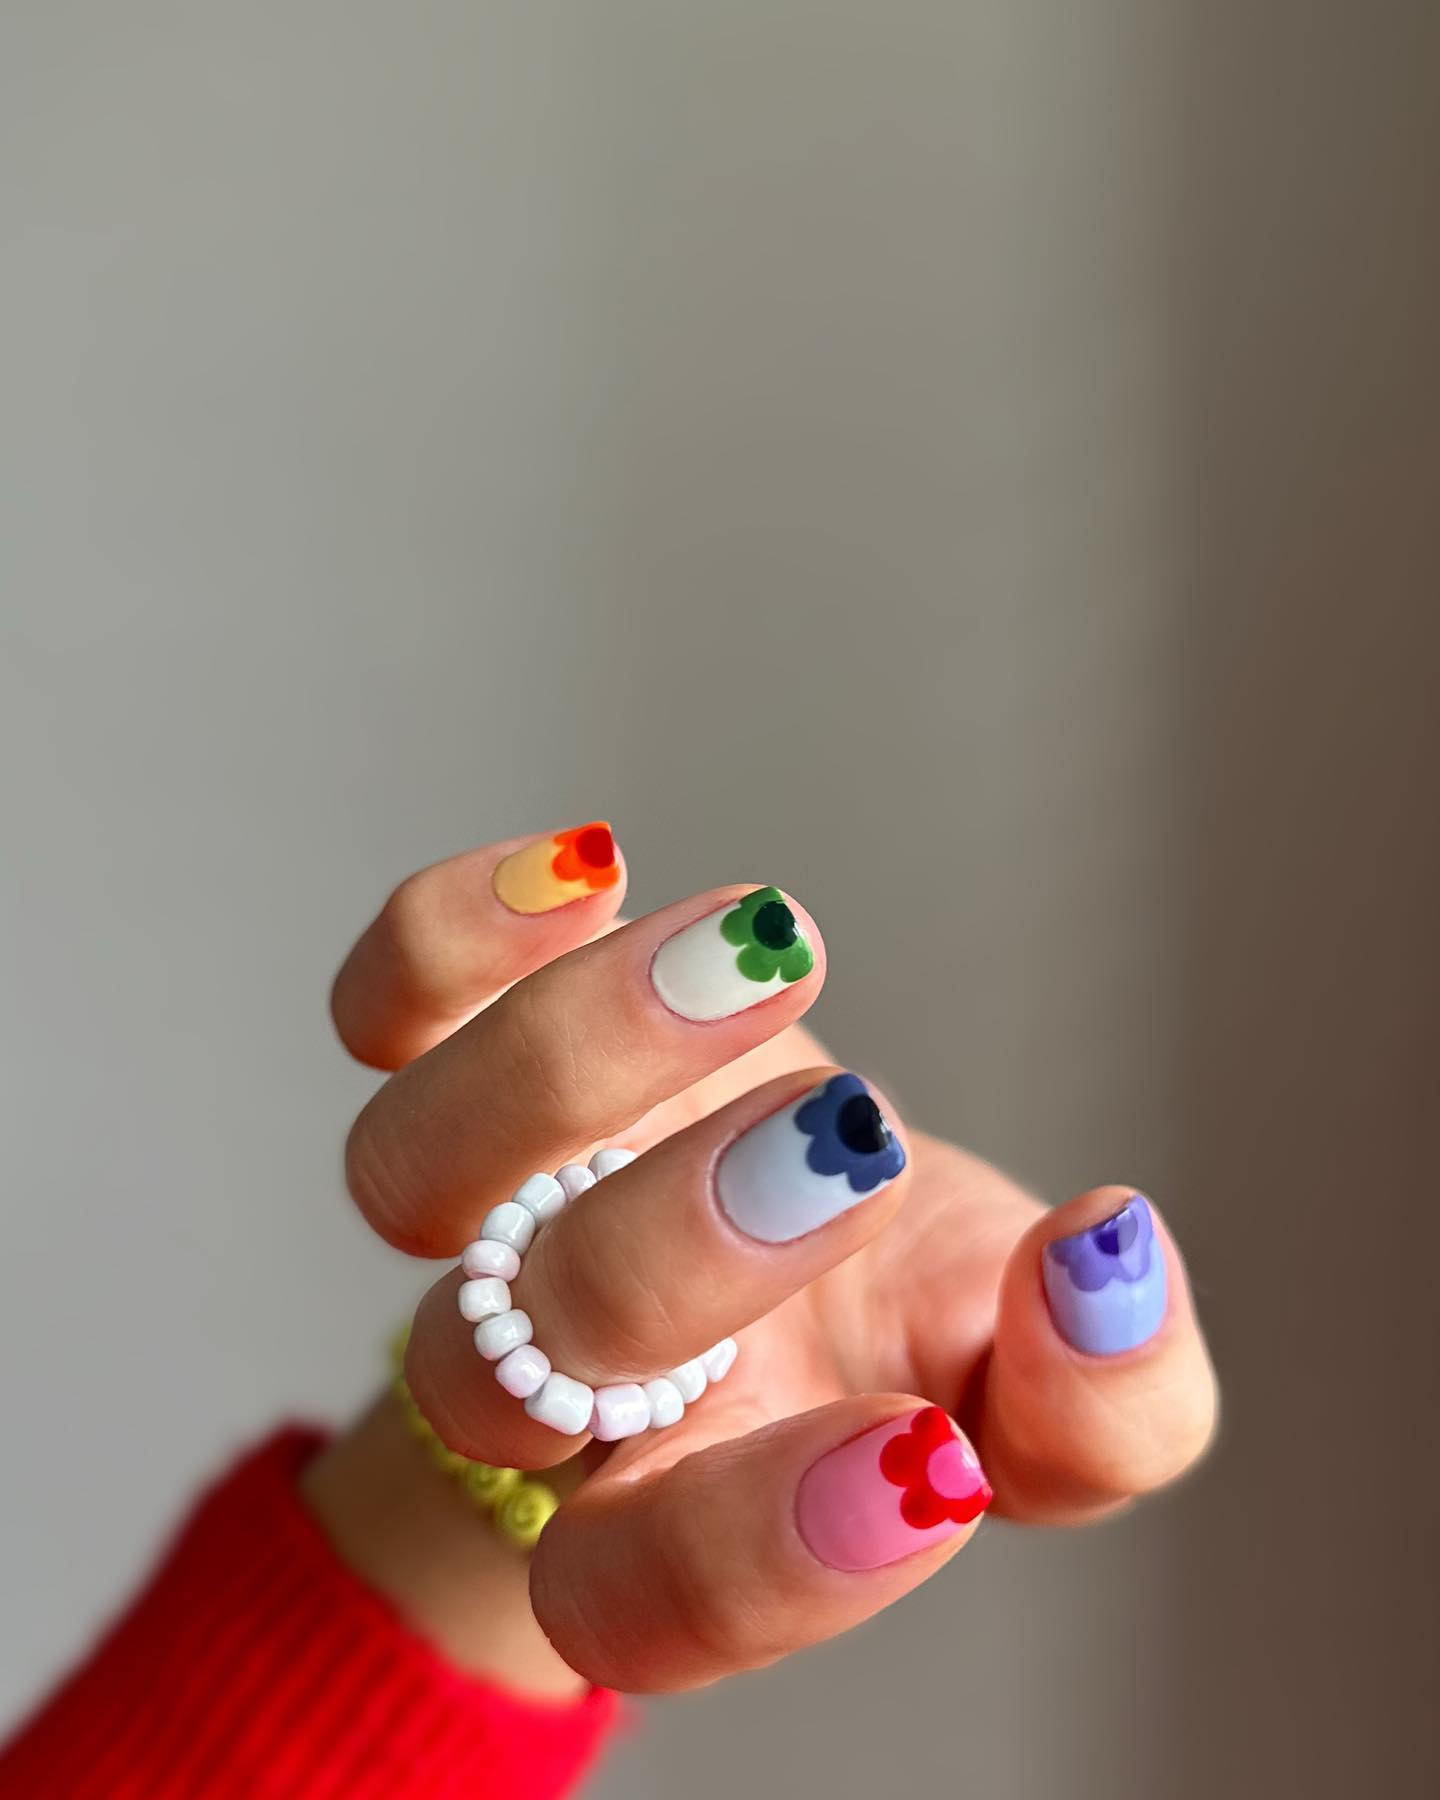 Rainbow Nails Are the Happiest Beauty Trend We've Seen | Who What Wear UK